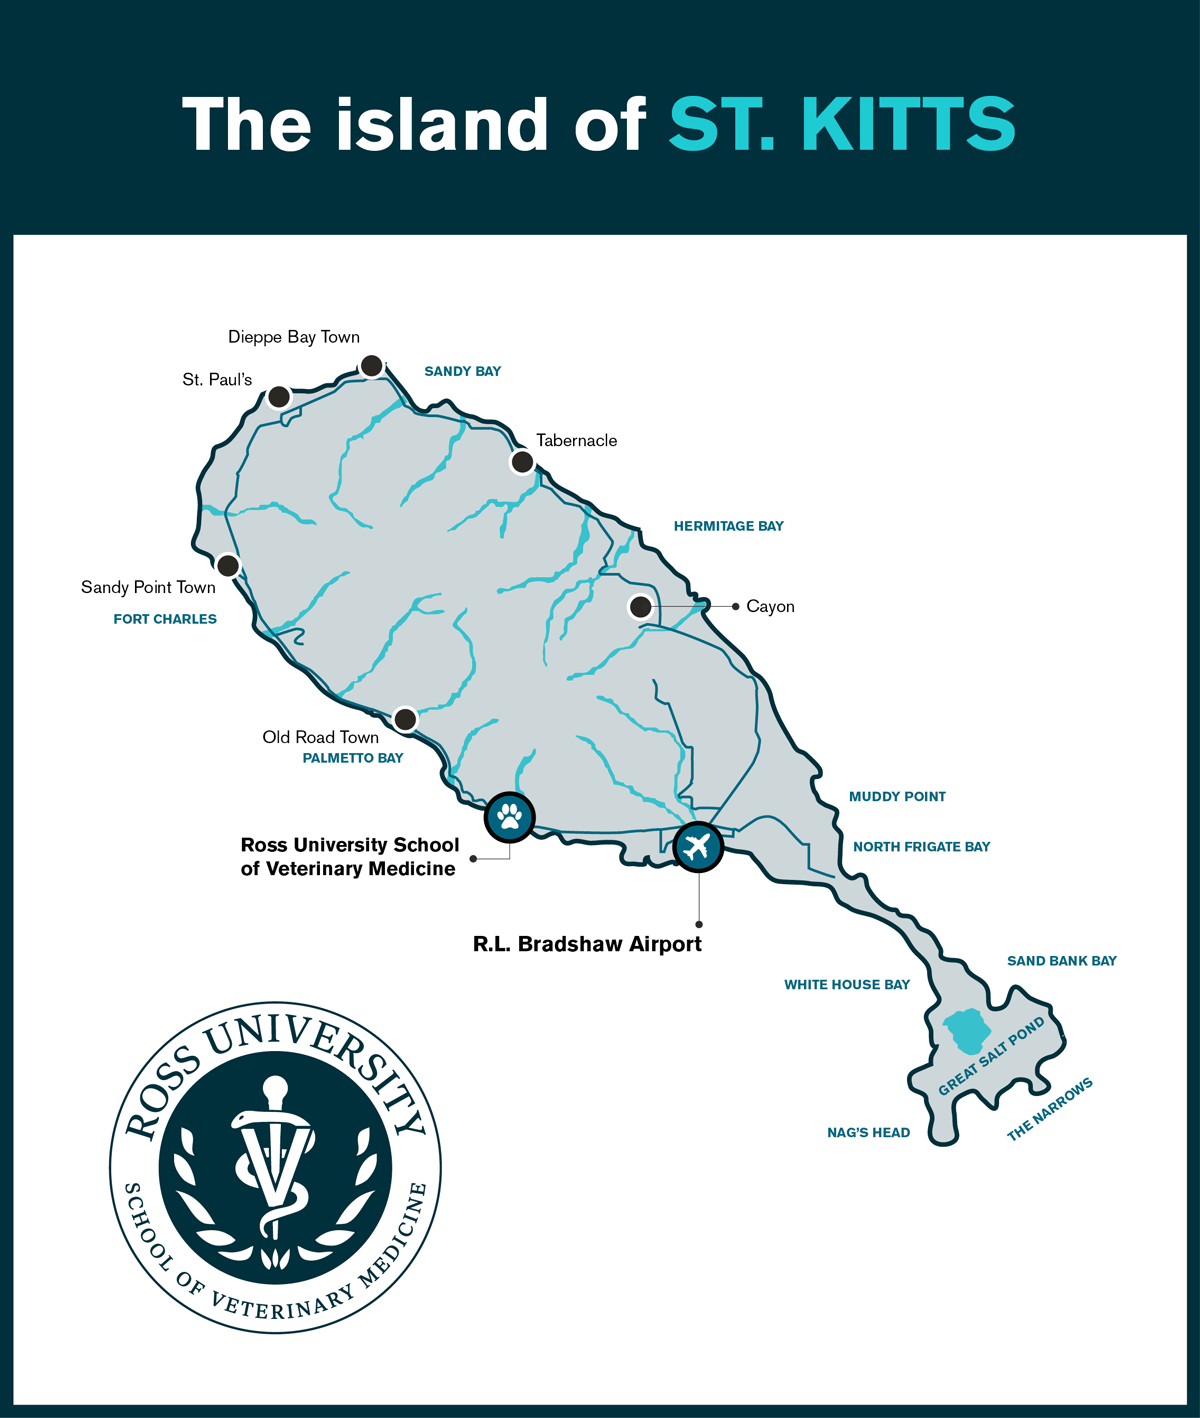 the Island of St. Kitts